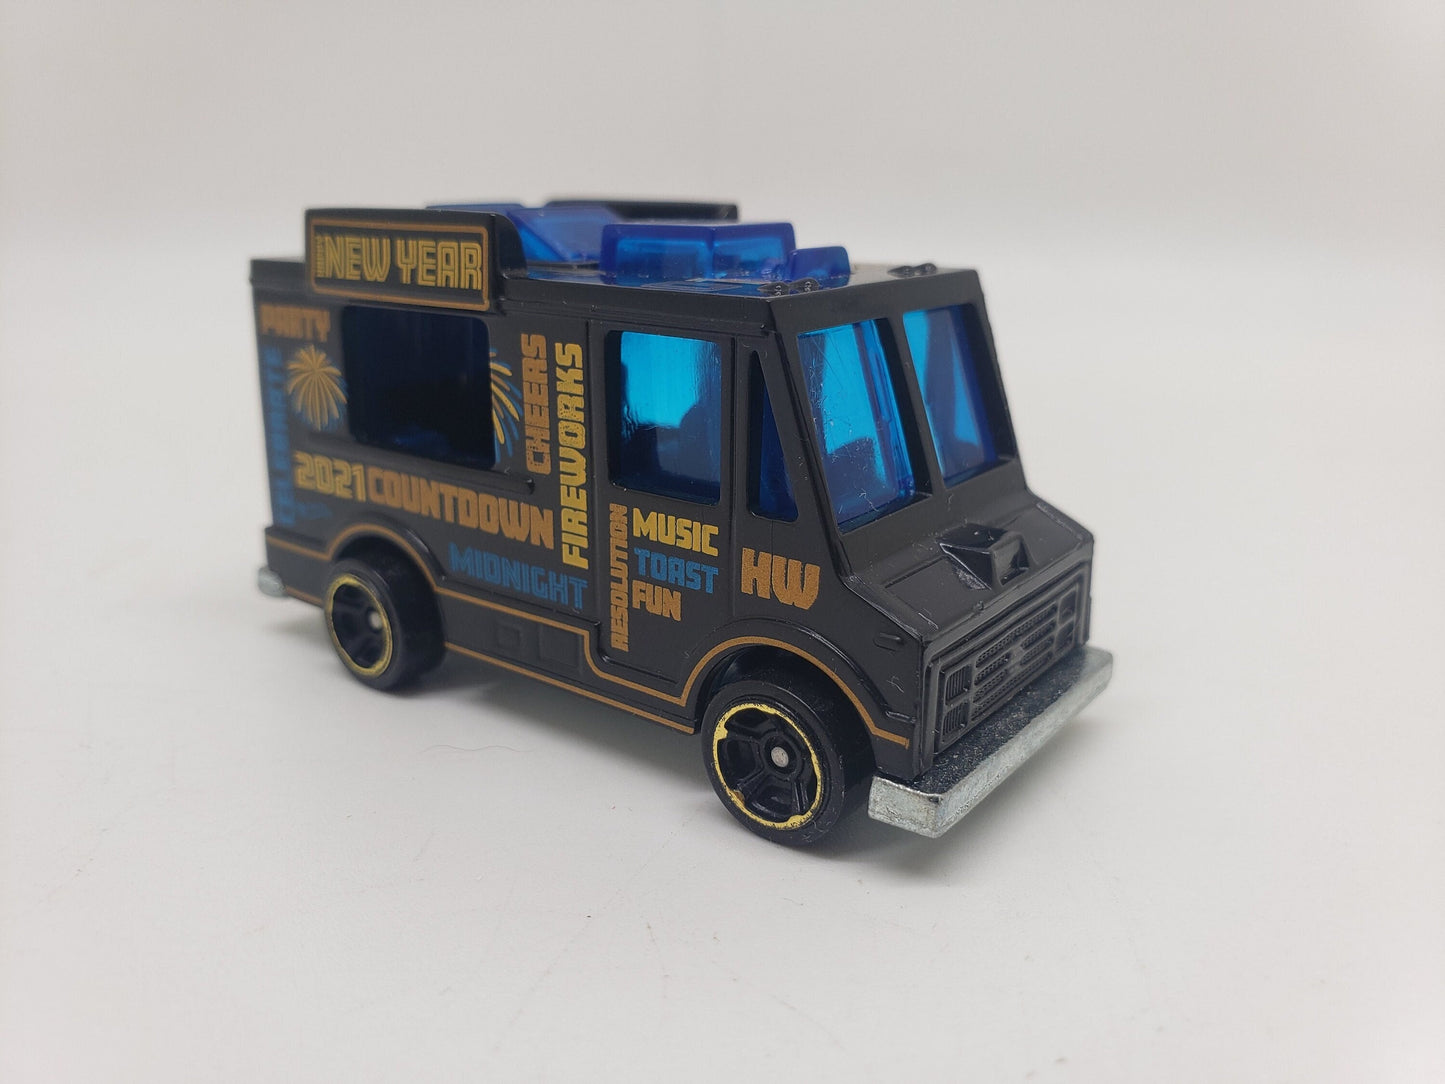 Hot Wheels Good Humor Truck Quick Bite Black Happy New Year Holiday Racers Perfect Birthday Gift Miniature Collectible Scale Model Toy Car